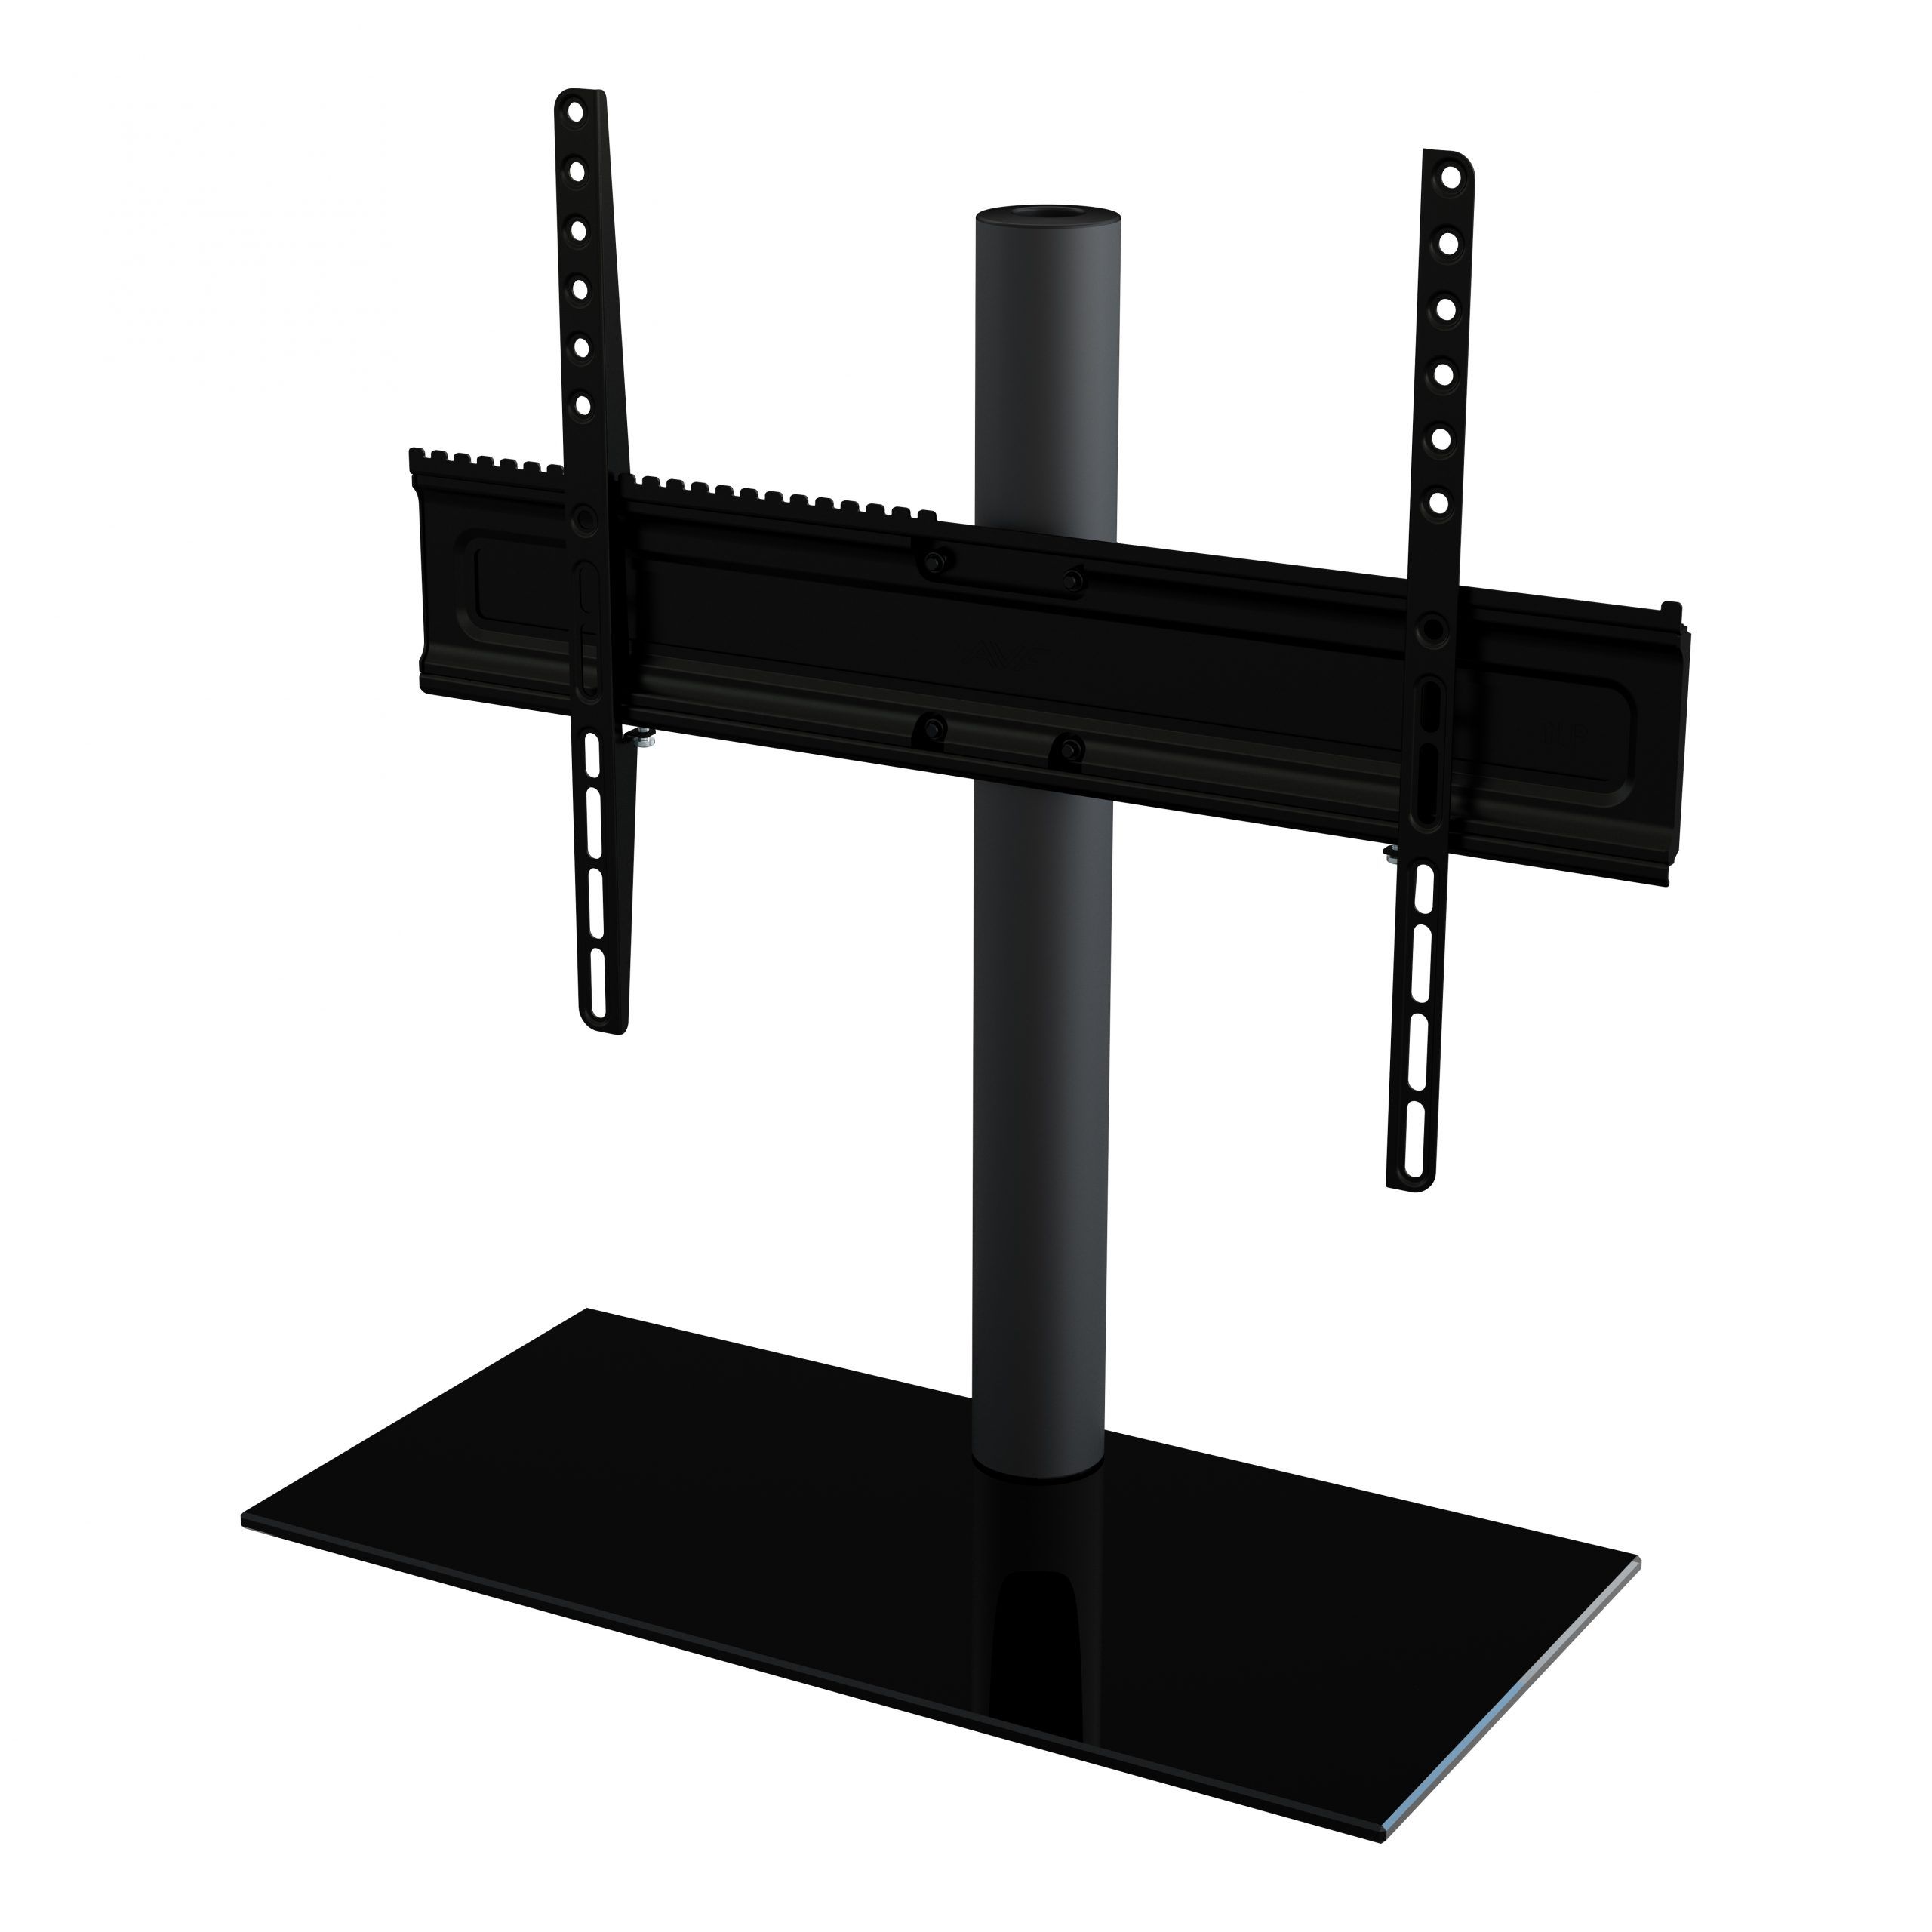 Avf B600bb A Universal Table Top Tv Stand / Tv Base – Fits Pertaining To Avf Tv Stands (View 13 of 15)